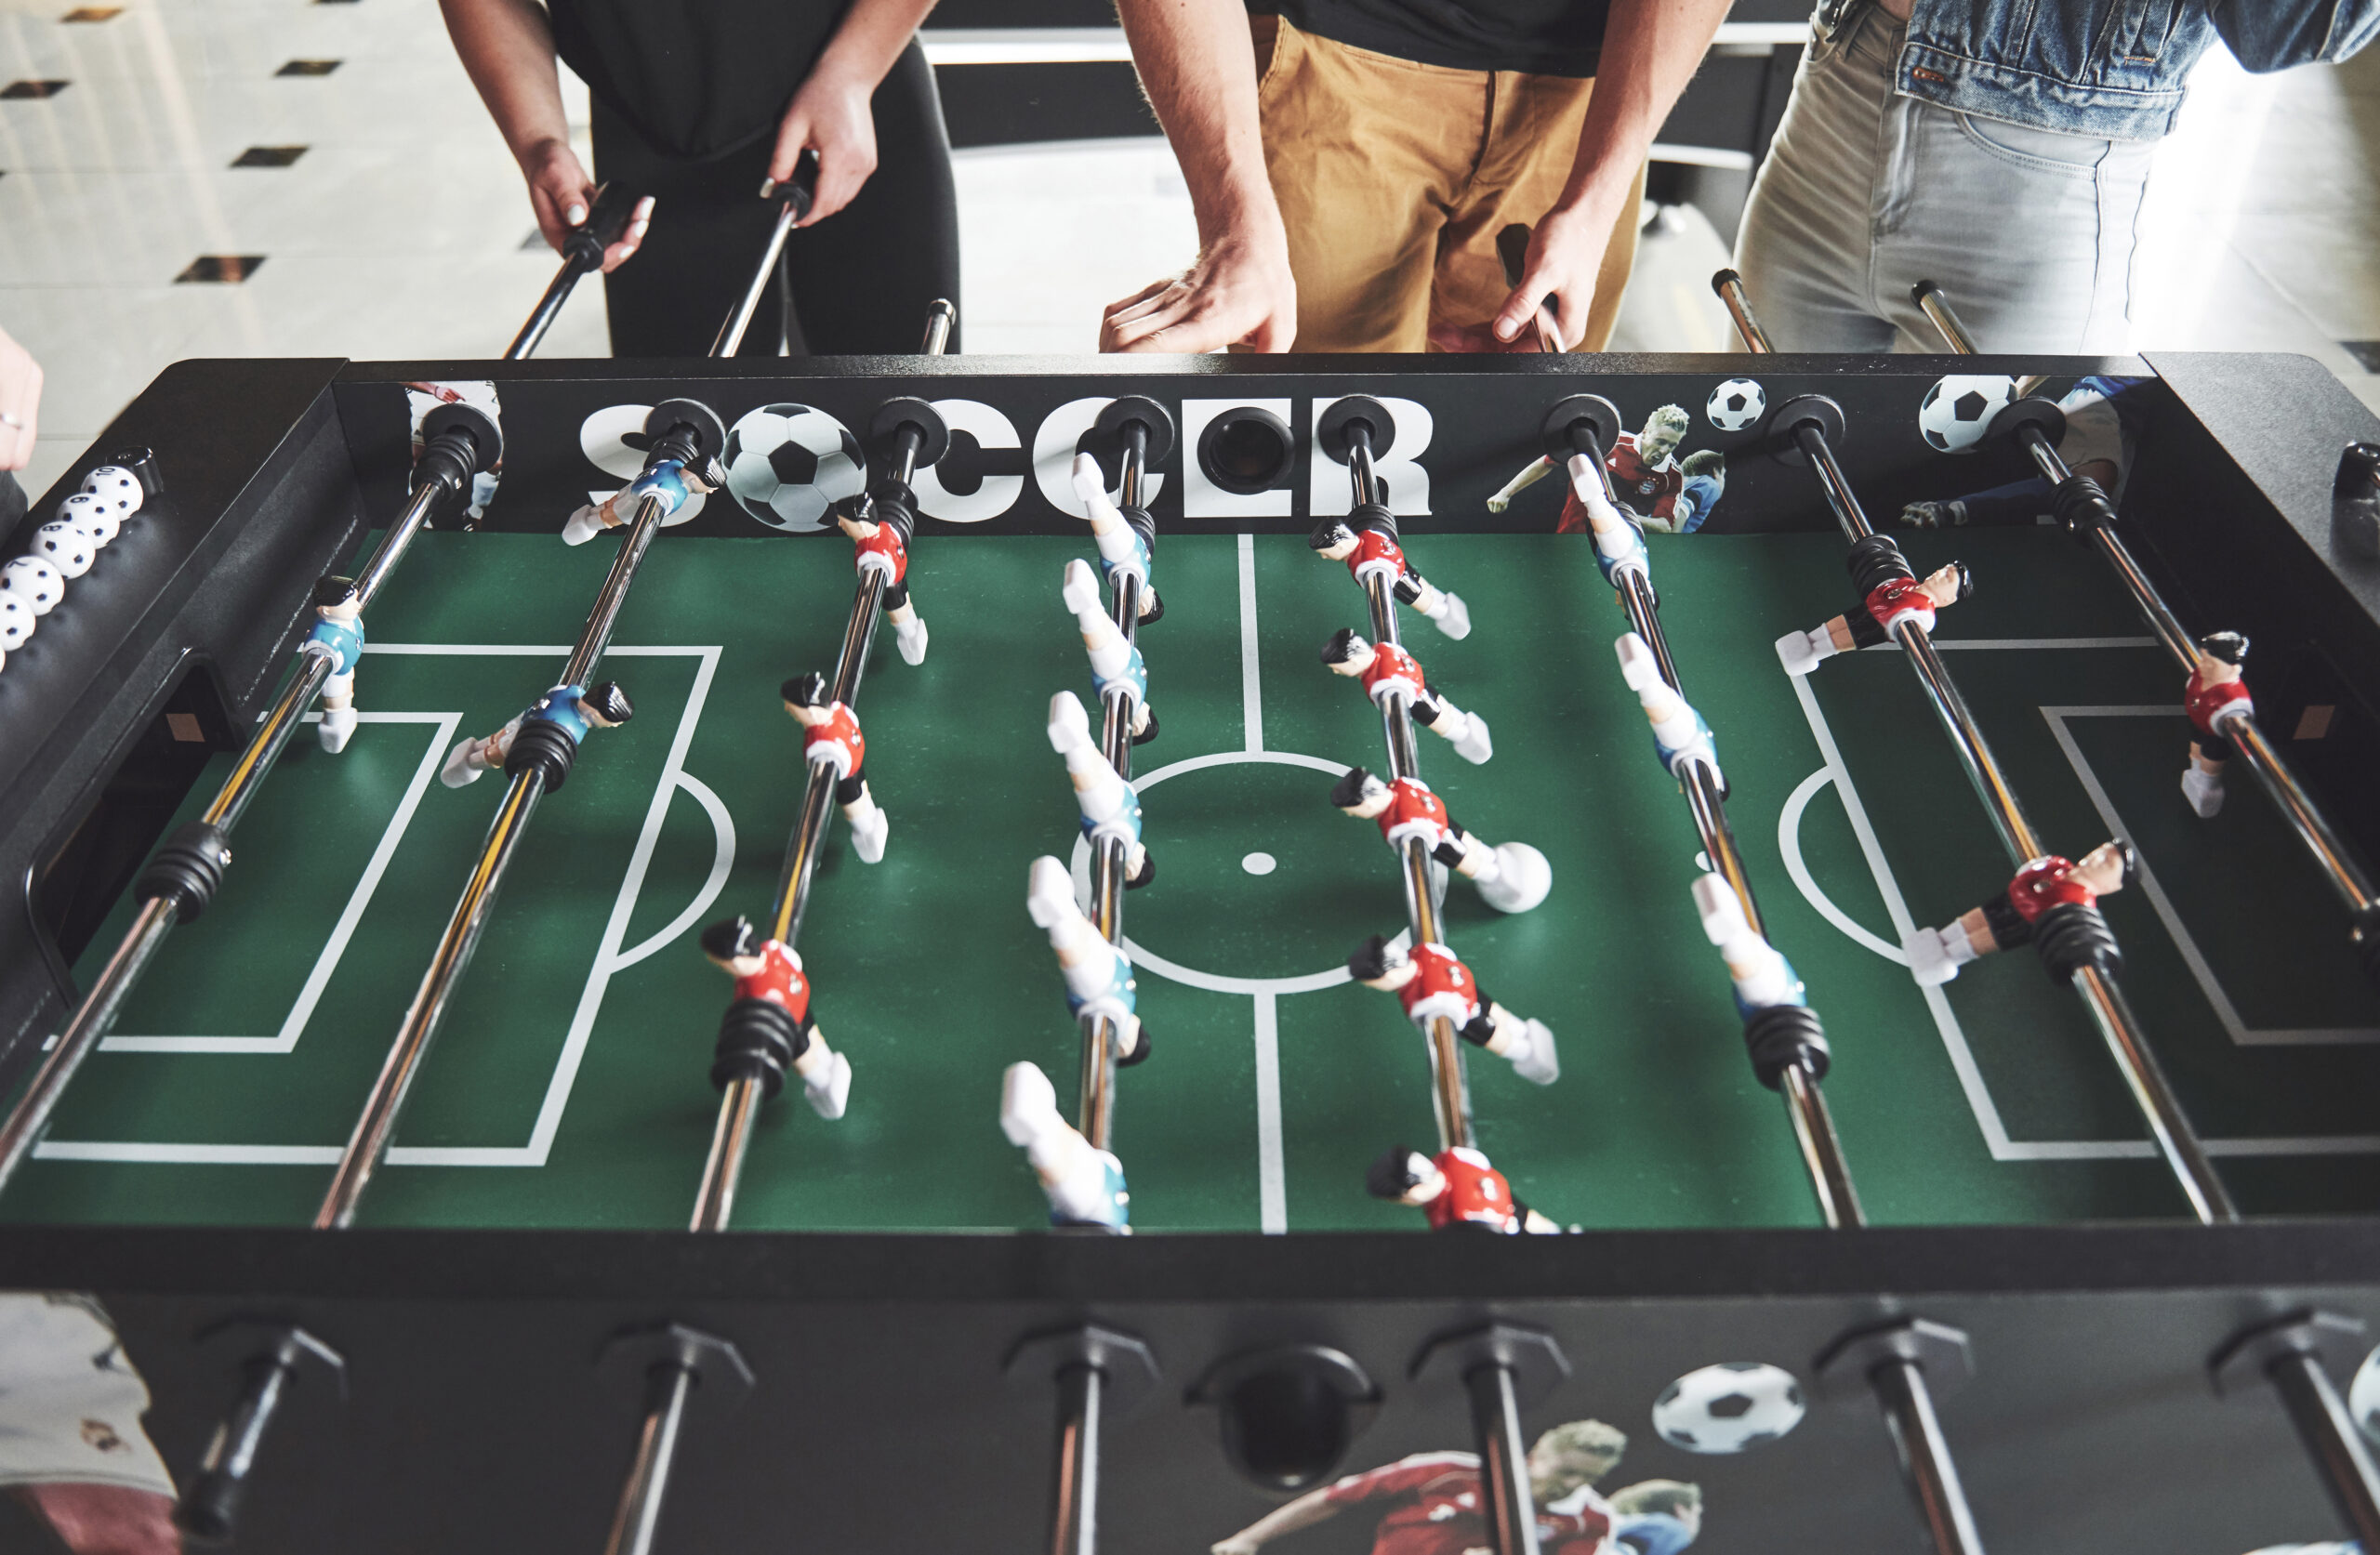 friends together play board games table football have fun free time scaled